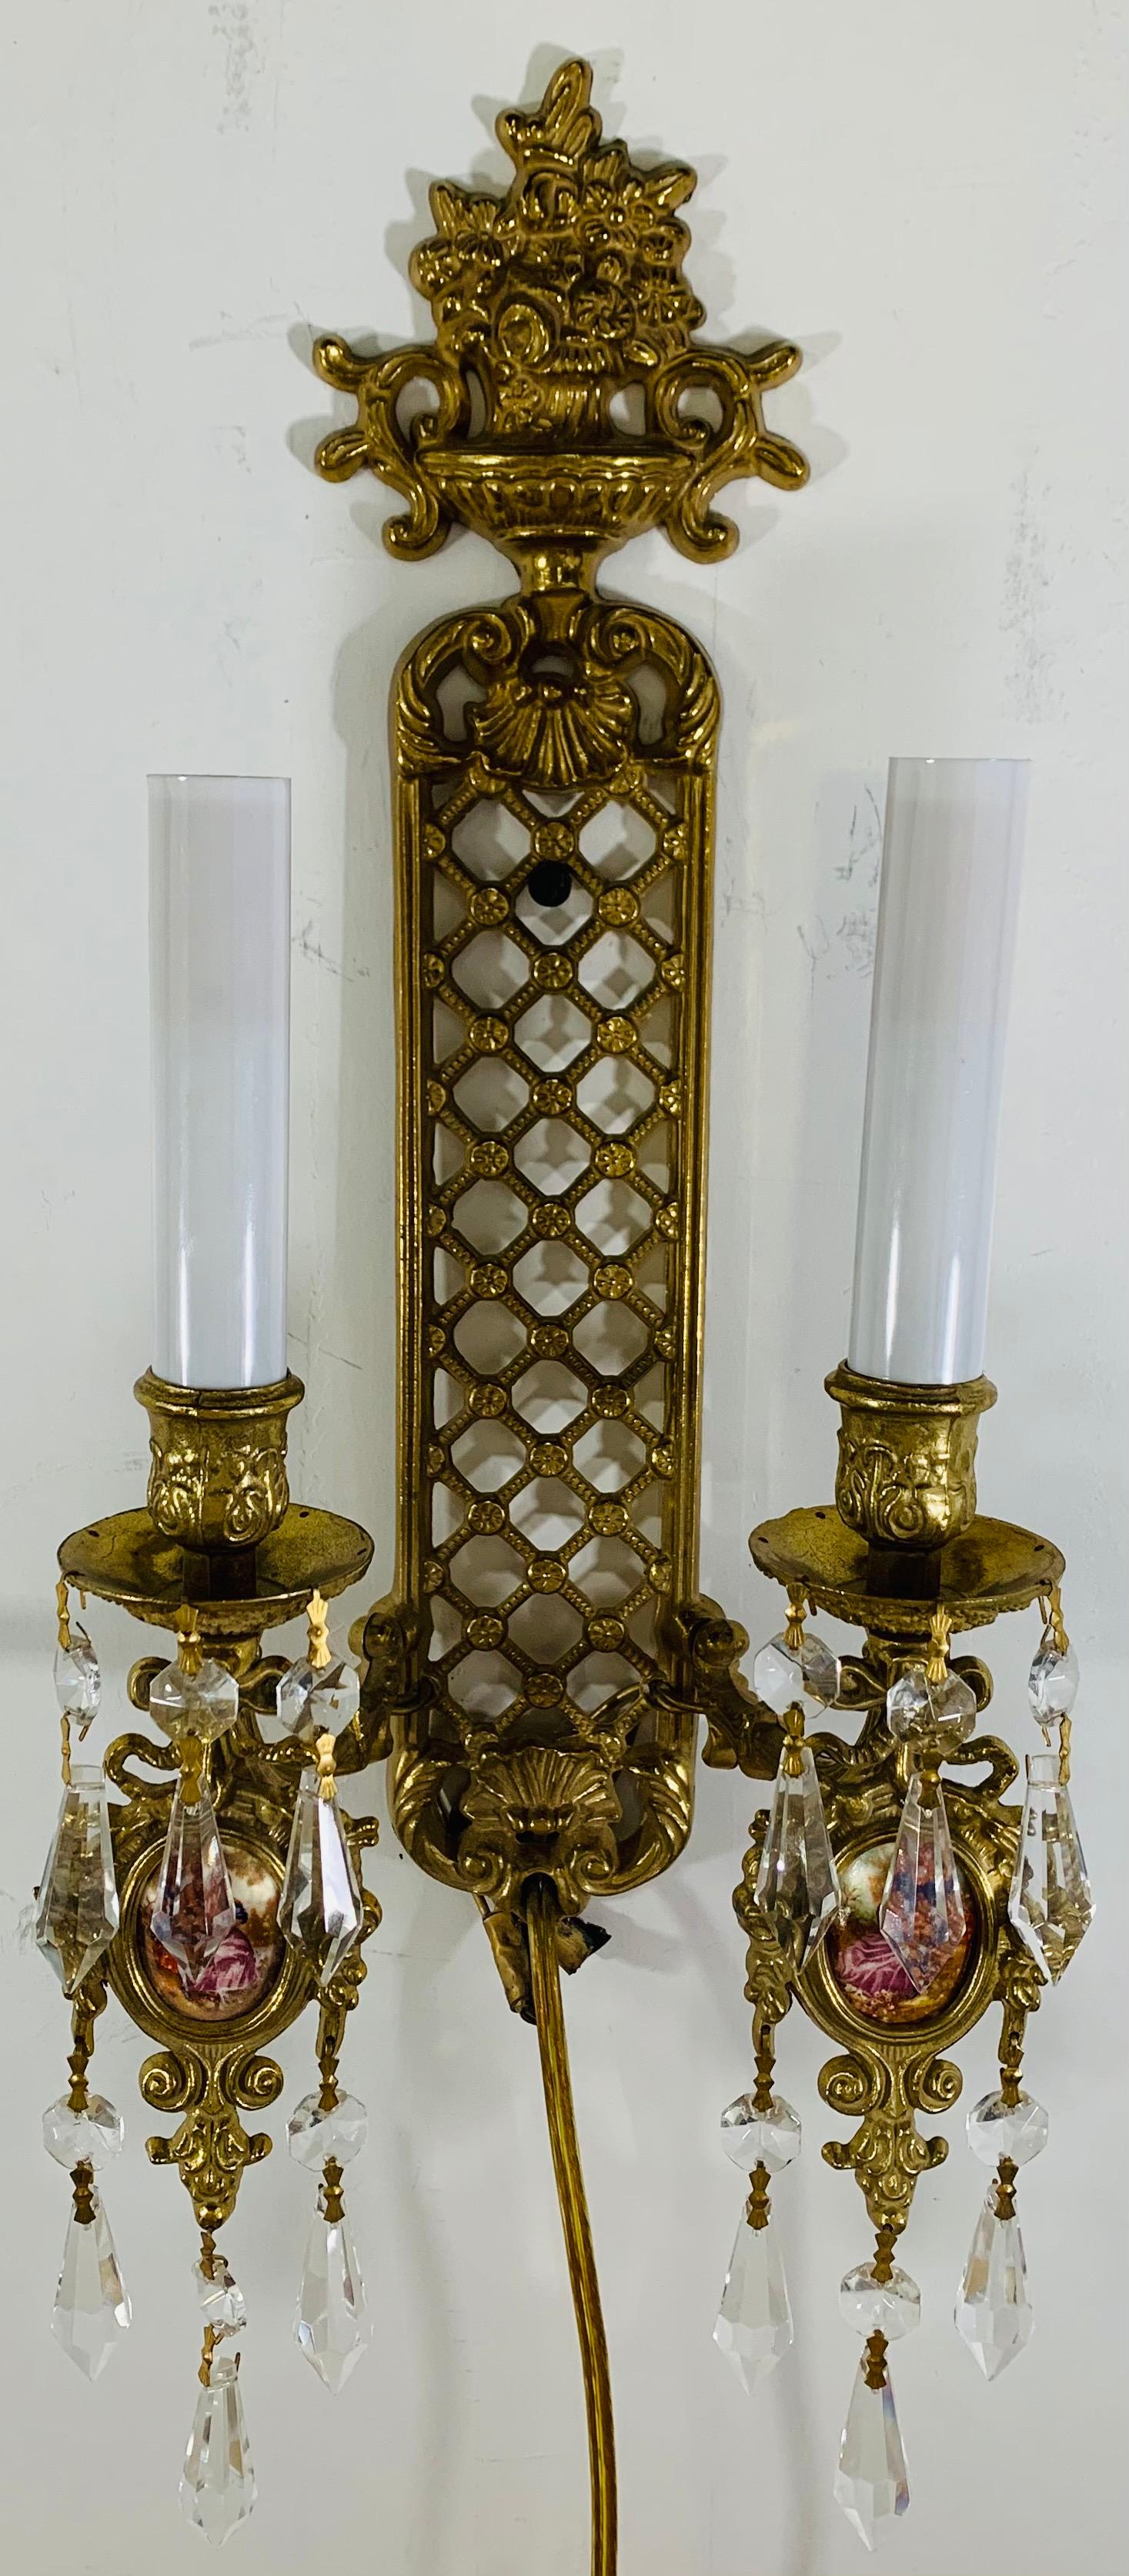 A pair of beautiful brass wall sconces in the style of Louis XVI. The pair features faux royal Vienna print oval inserts with three beautiful crystal prisms hanging from each insert. Each sconce has two arms with candelabras. 

Measures: 6.75 W 17